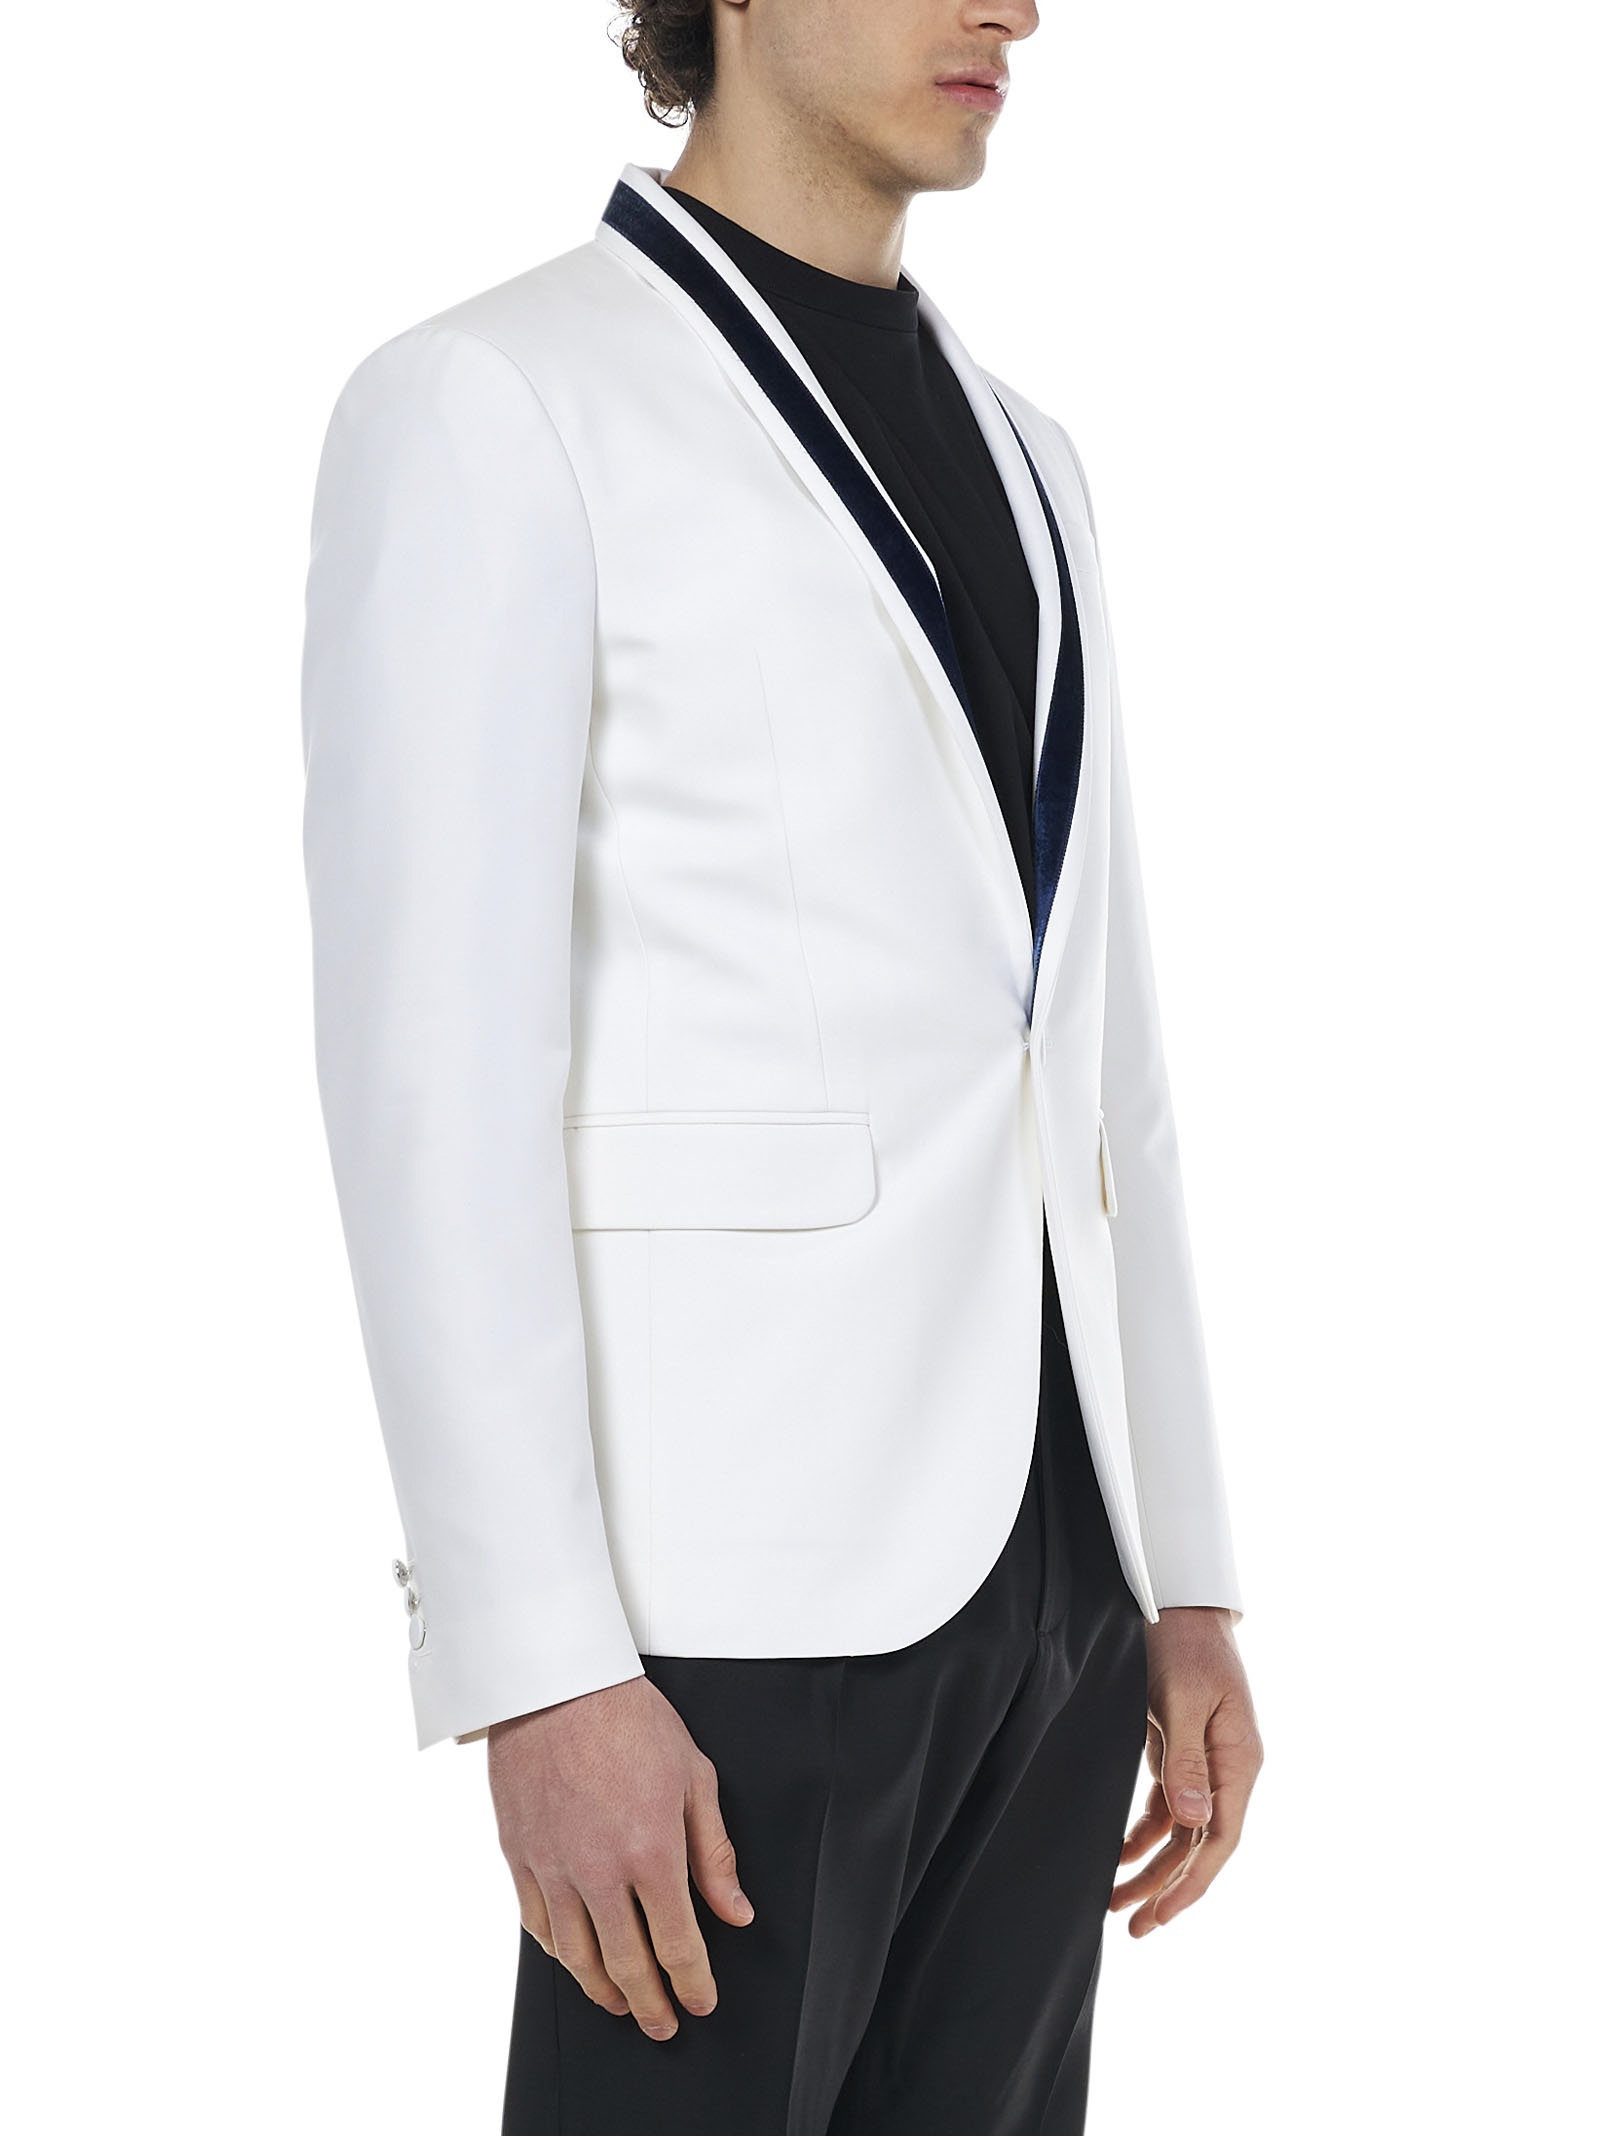 Tokyo suit with black tailored trousers and single-breasted blazer in white crêpe with blue velvet i - 4